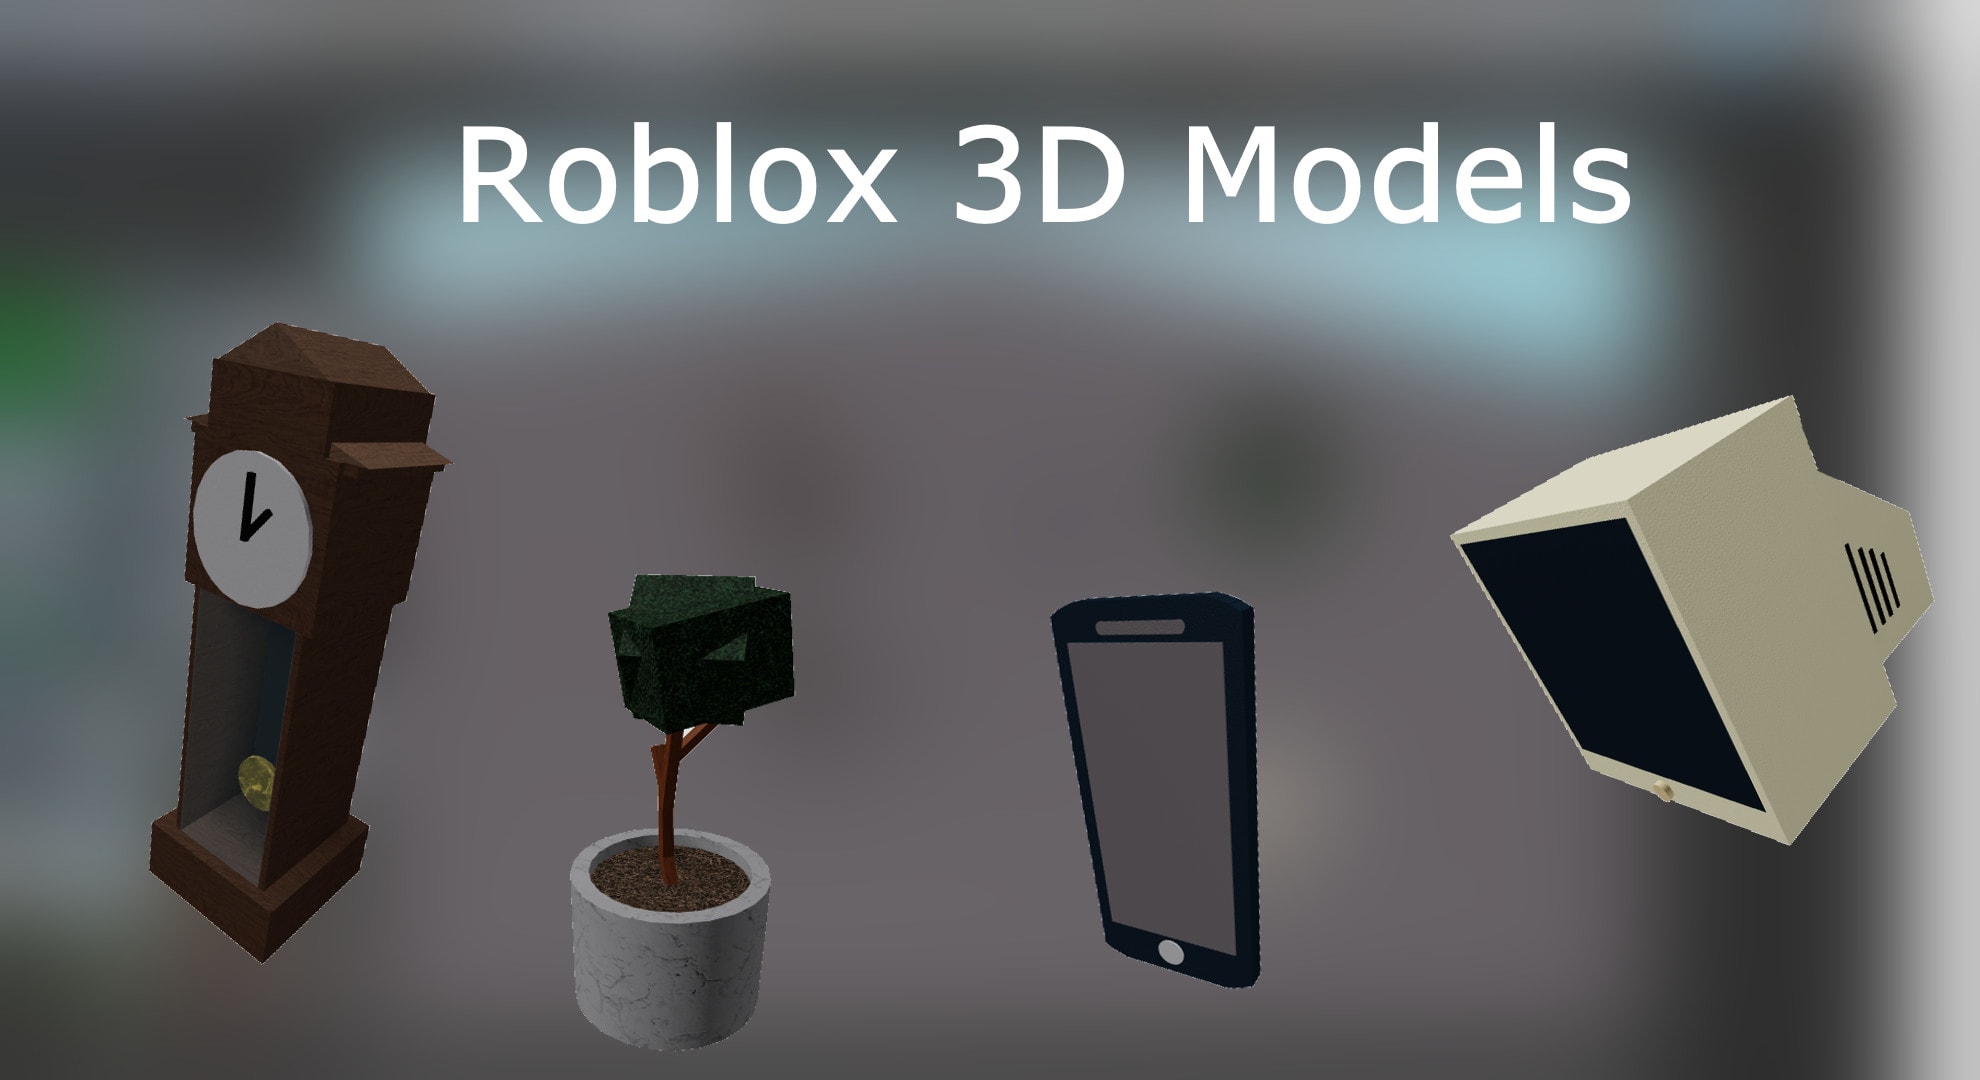 Model Anything In Roblox Studio By Polhiddan - roblox models for ads